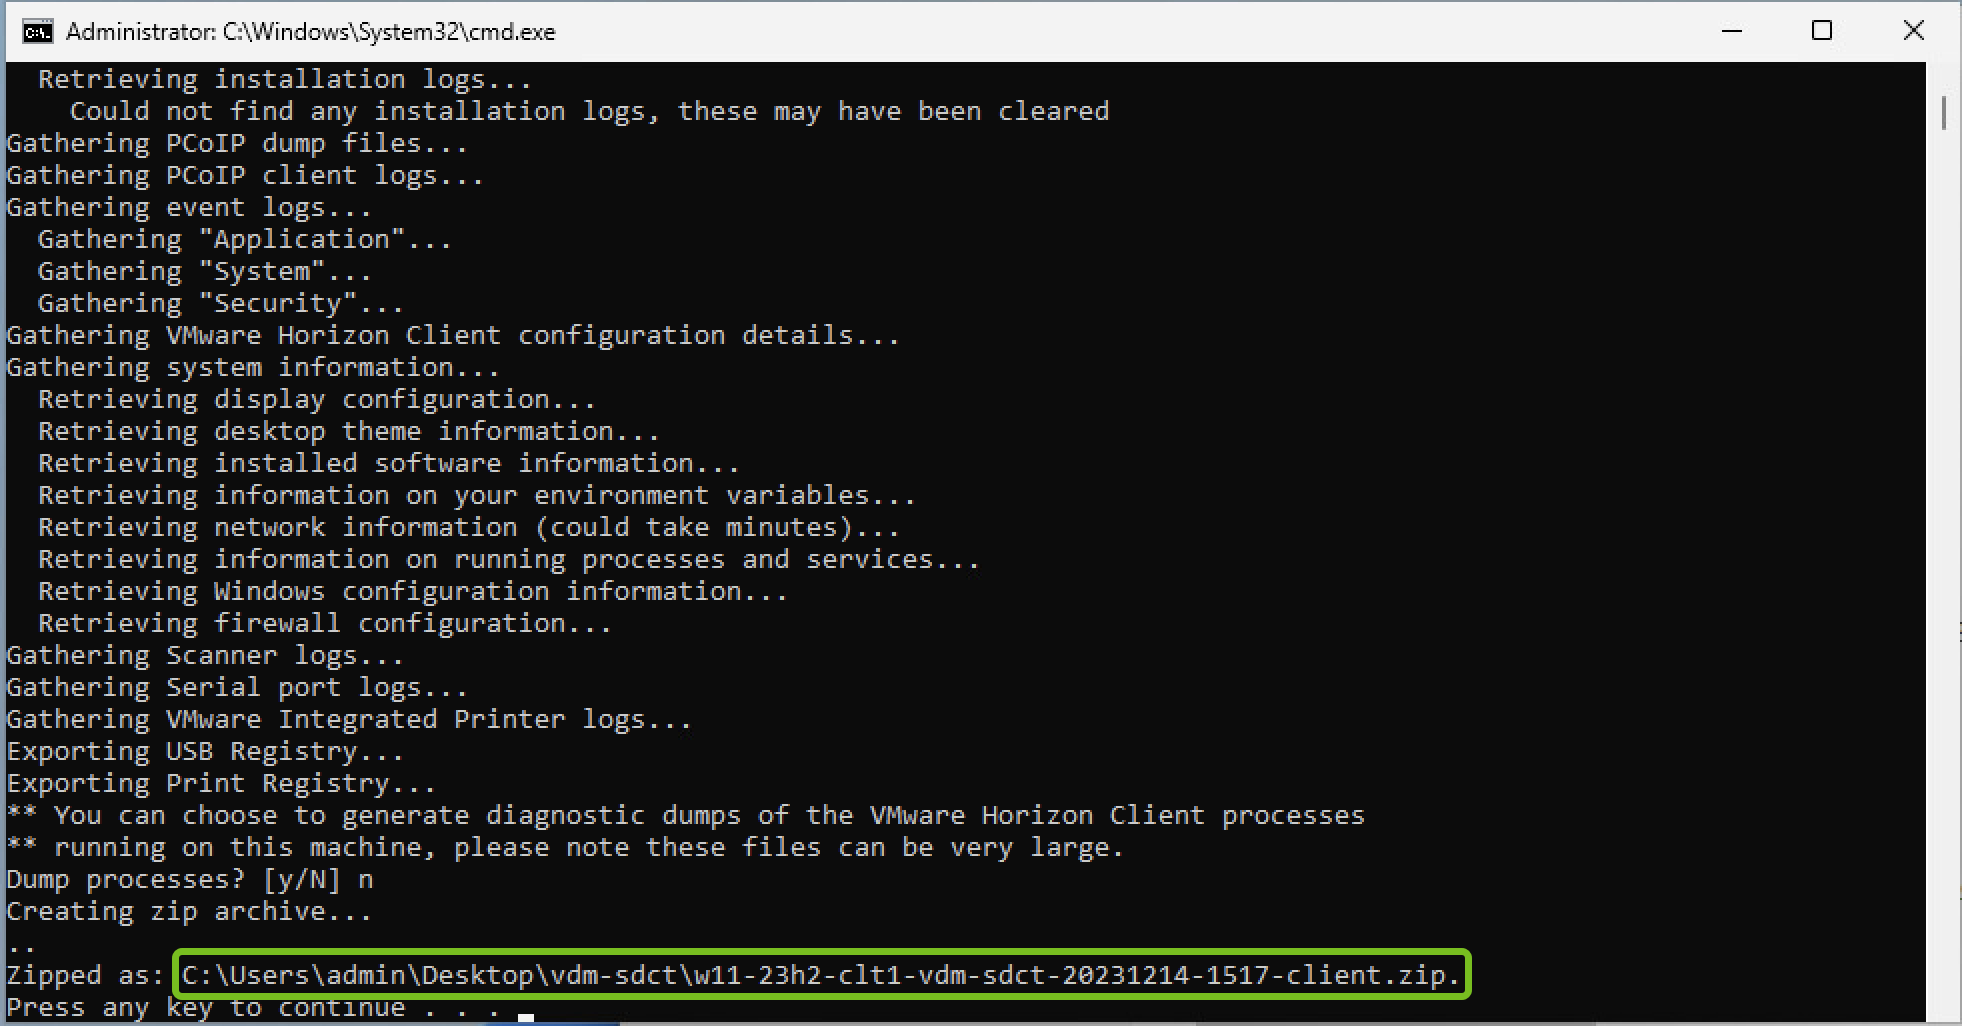 Refer to the terminal for the directory path to the packaged log file.